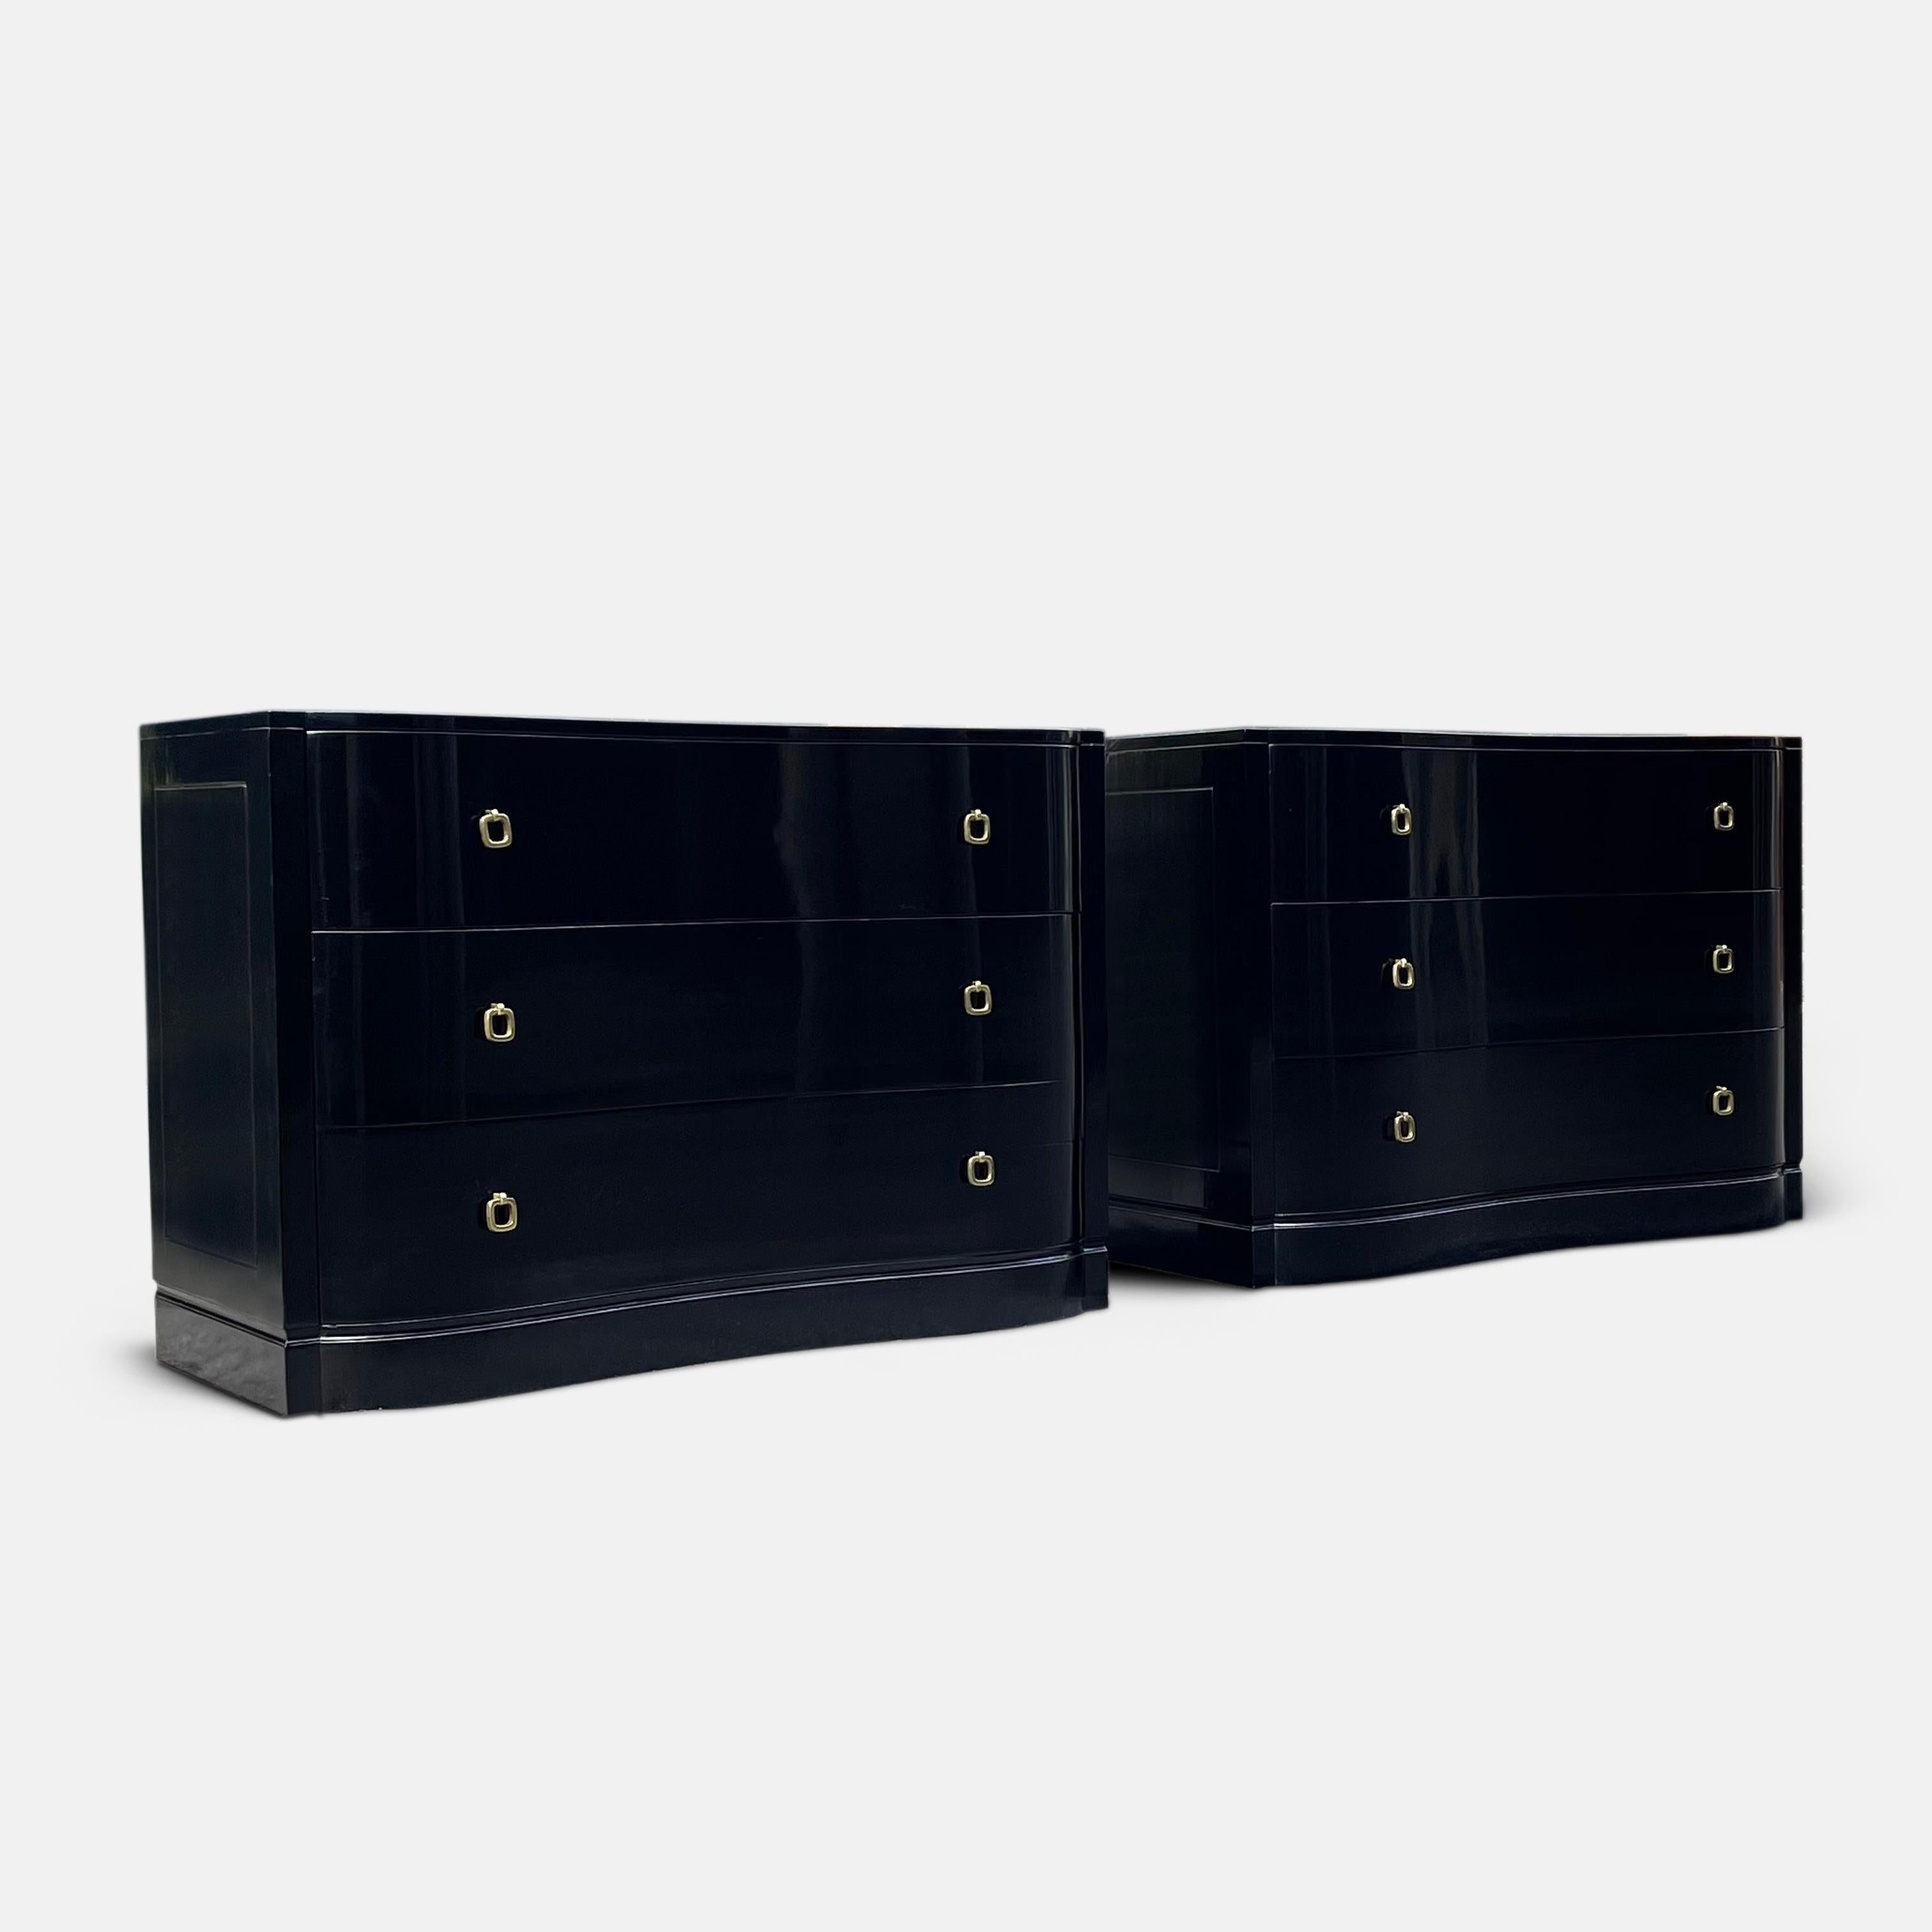 Art Deco 1940s Pair of Chests by Lorin Jackson for Grosfeld House